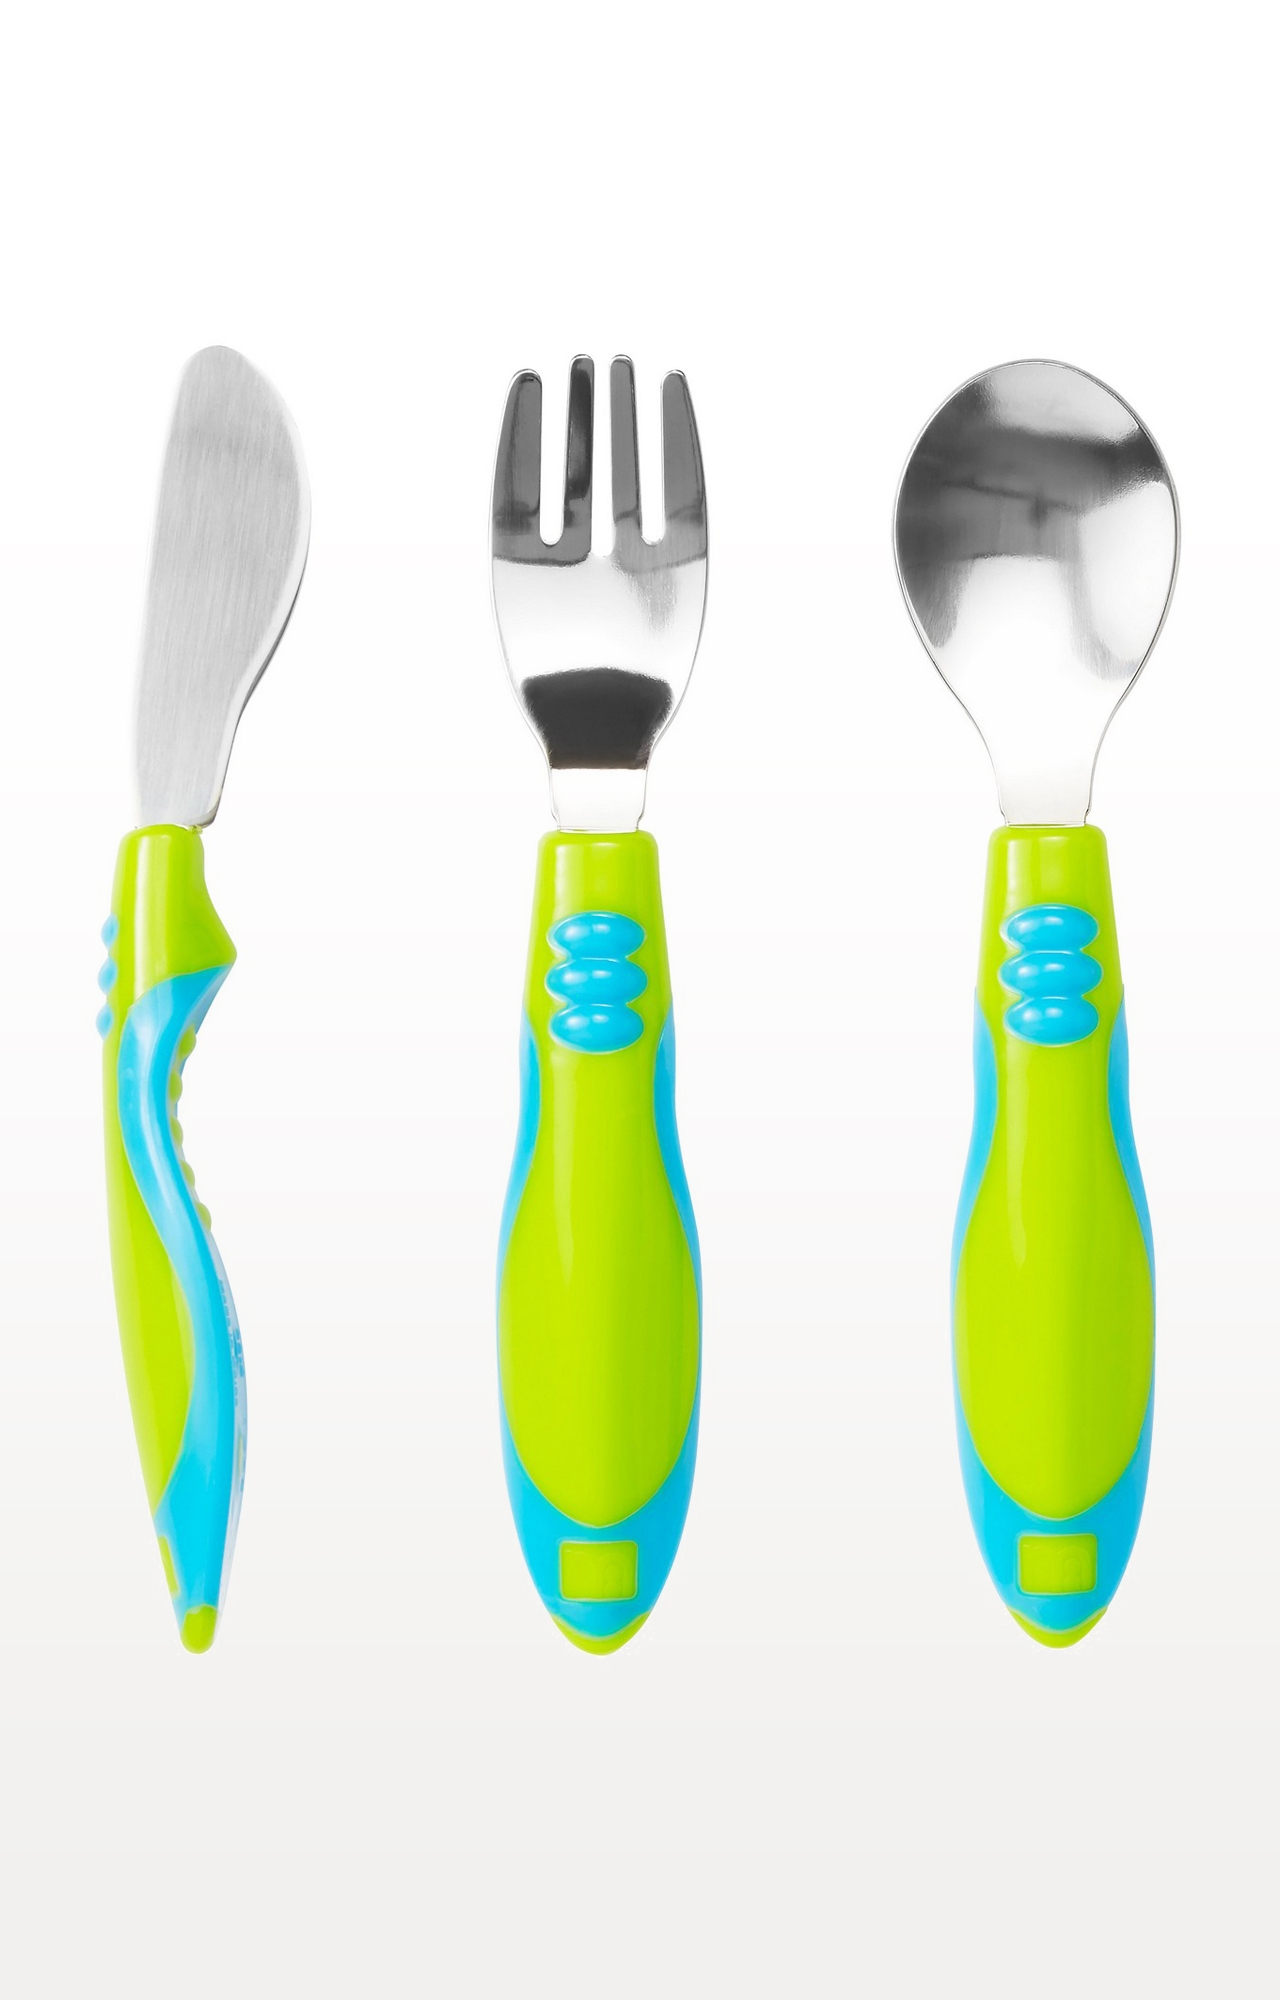 Easy Grip Toddler Cutlery Set - 3 Pieces (Blue)